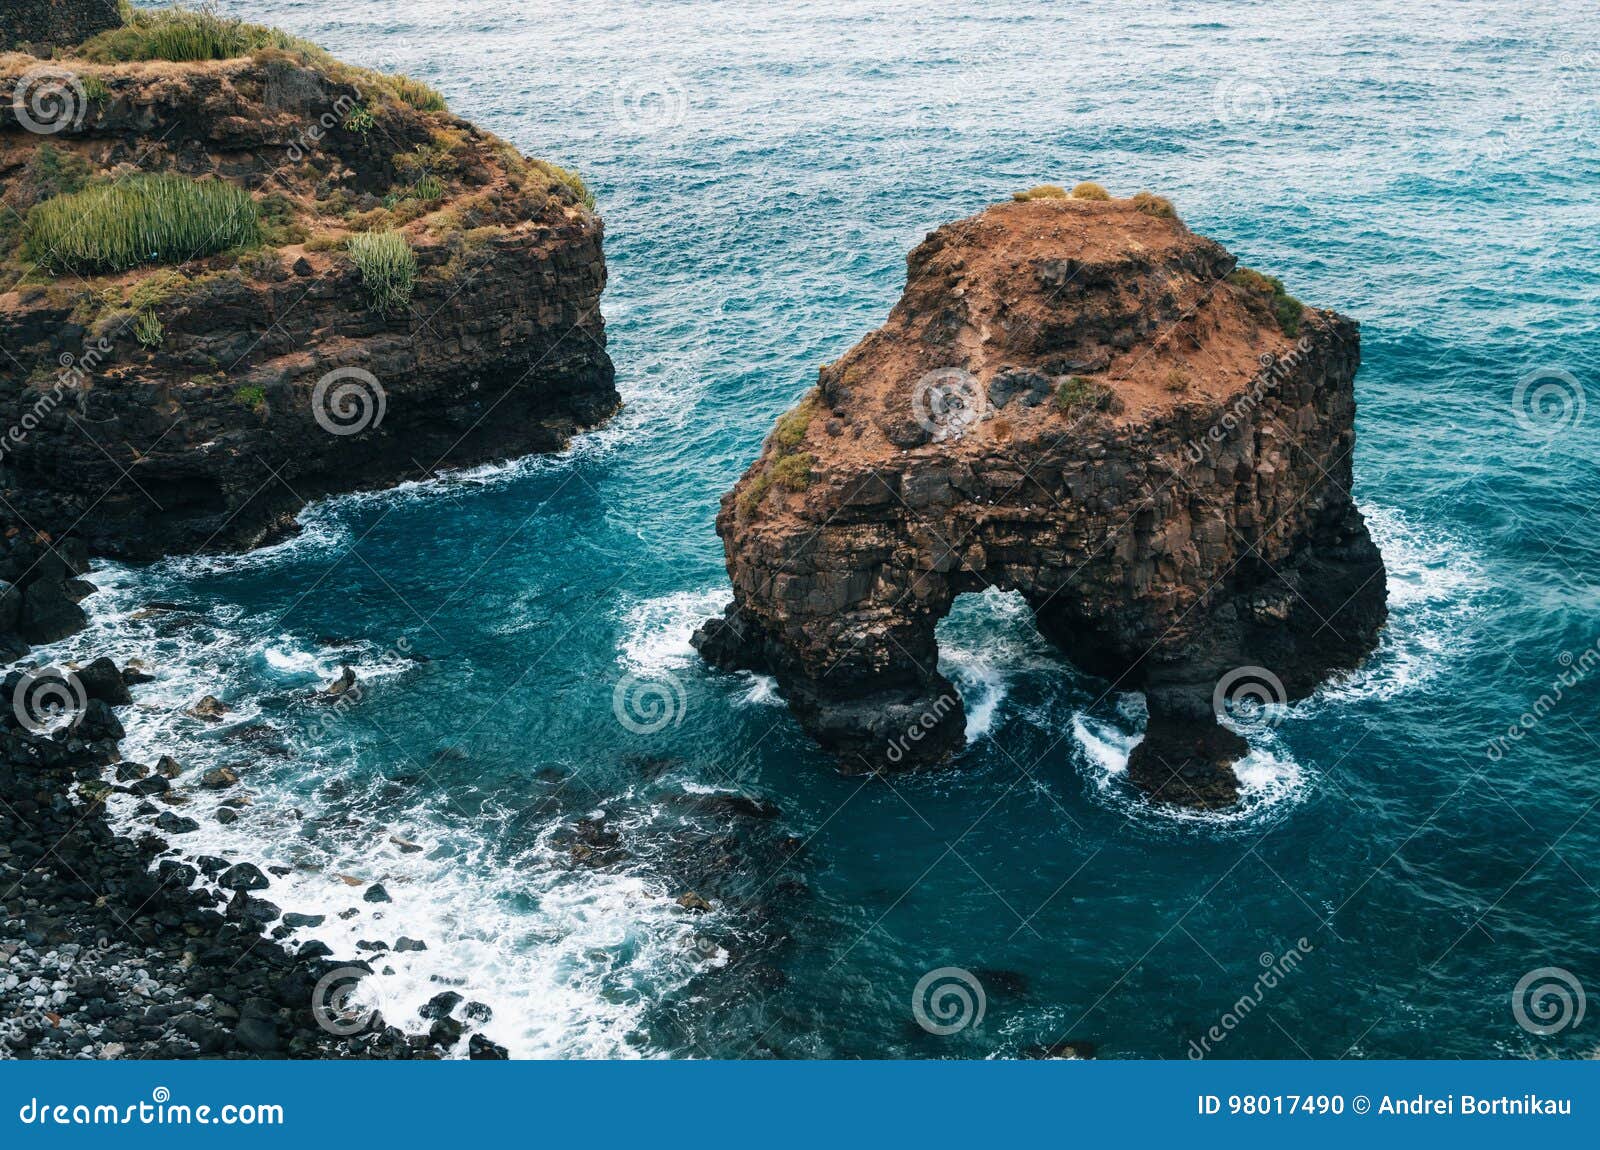 natural-arch-of-los-roques-beach-in-tenerife-stock-photo-image-of